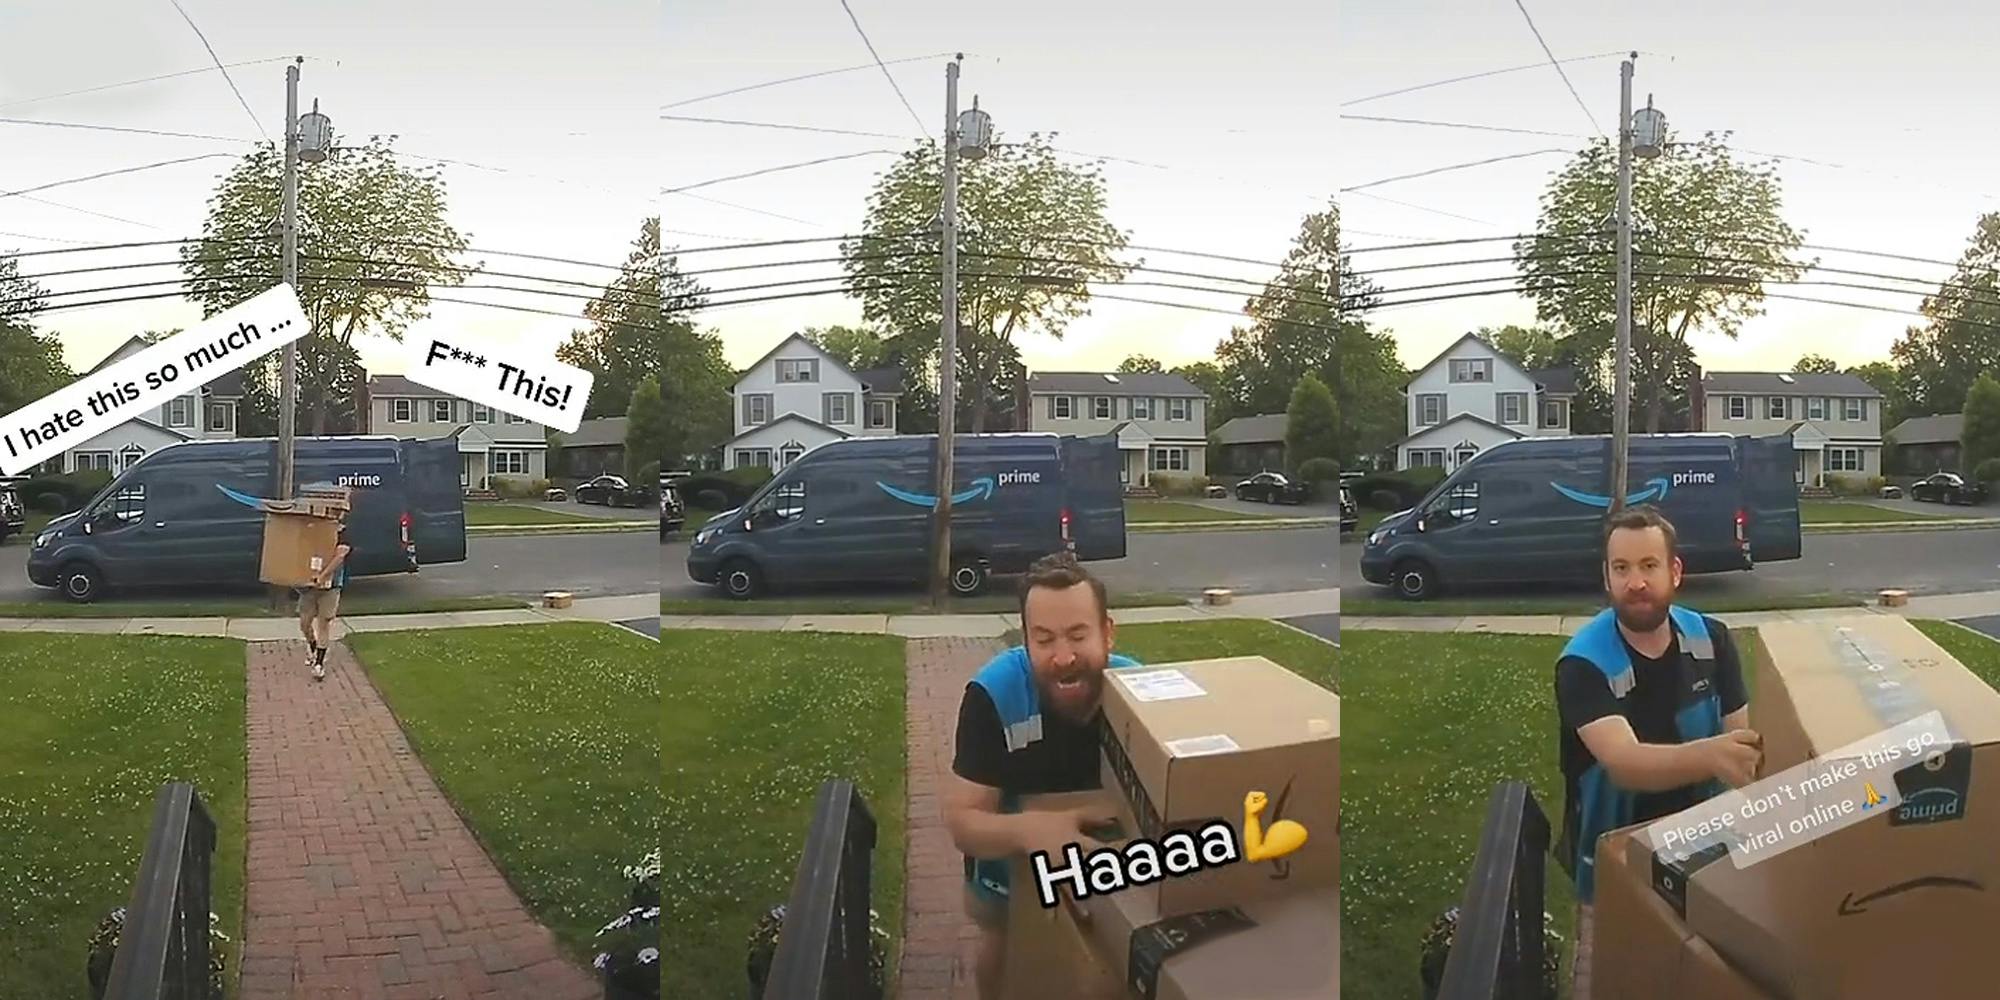 Amazon driver carrying boxes captions "I hate this so much... "F*** This!" (l) Amazon putting boxes on steps yelling the caption "Haaaa" (c) Amazon driver placing boxes on steps looking and speaking to doorbell camera caption "Please don't make this go viral online" (r)